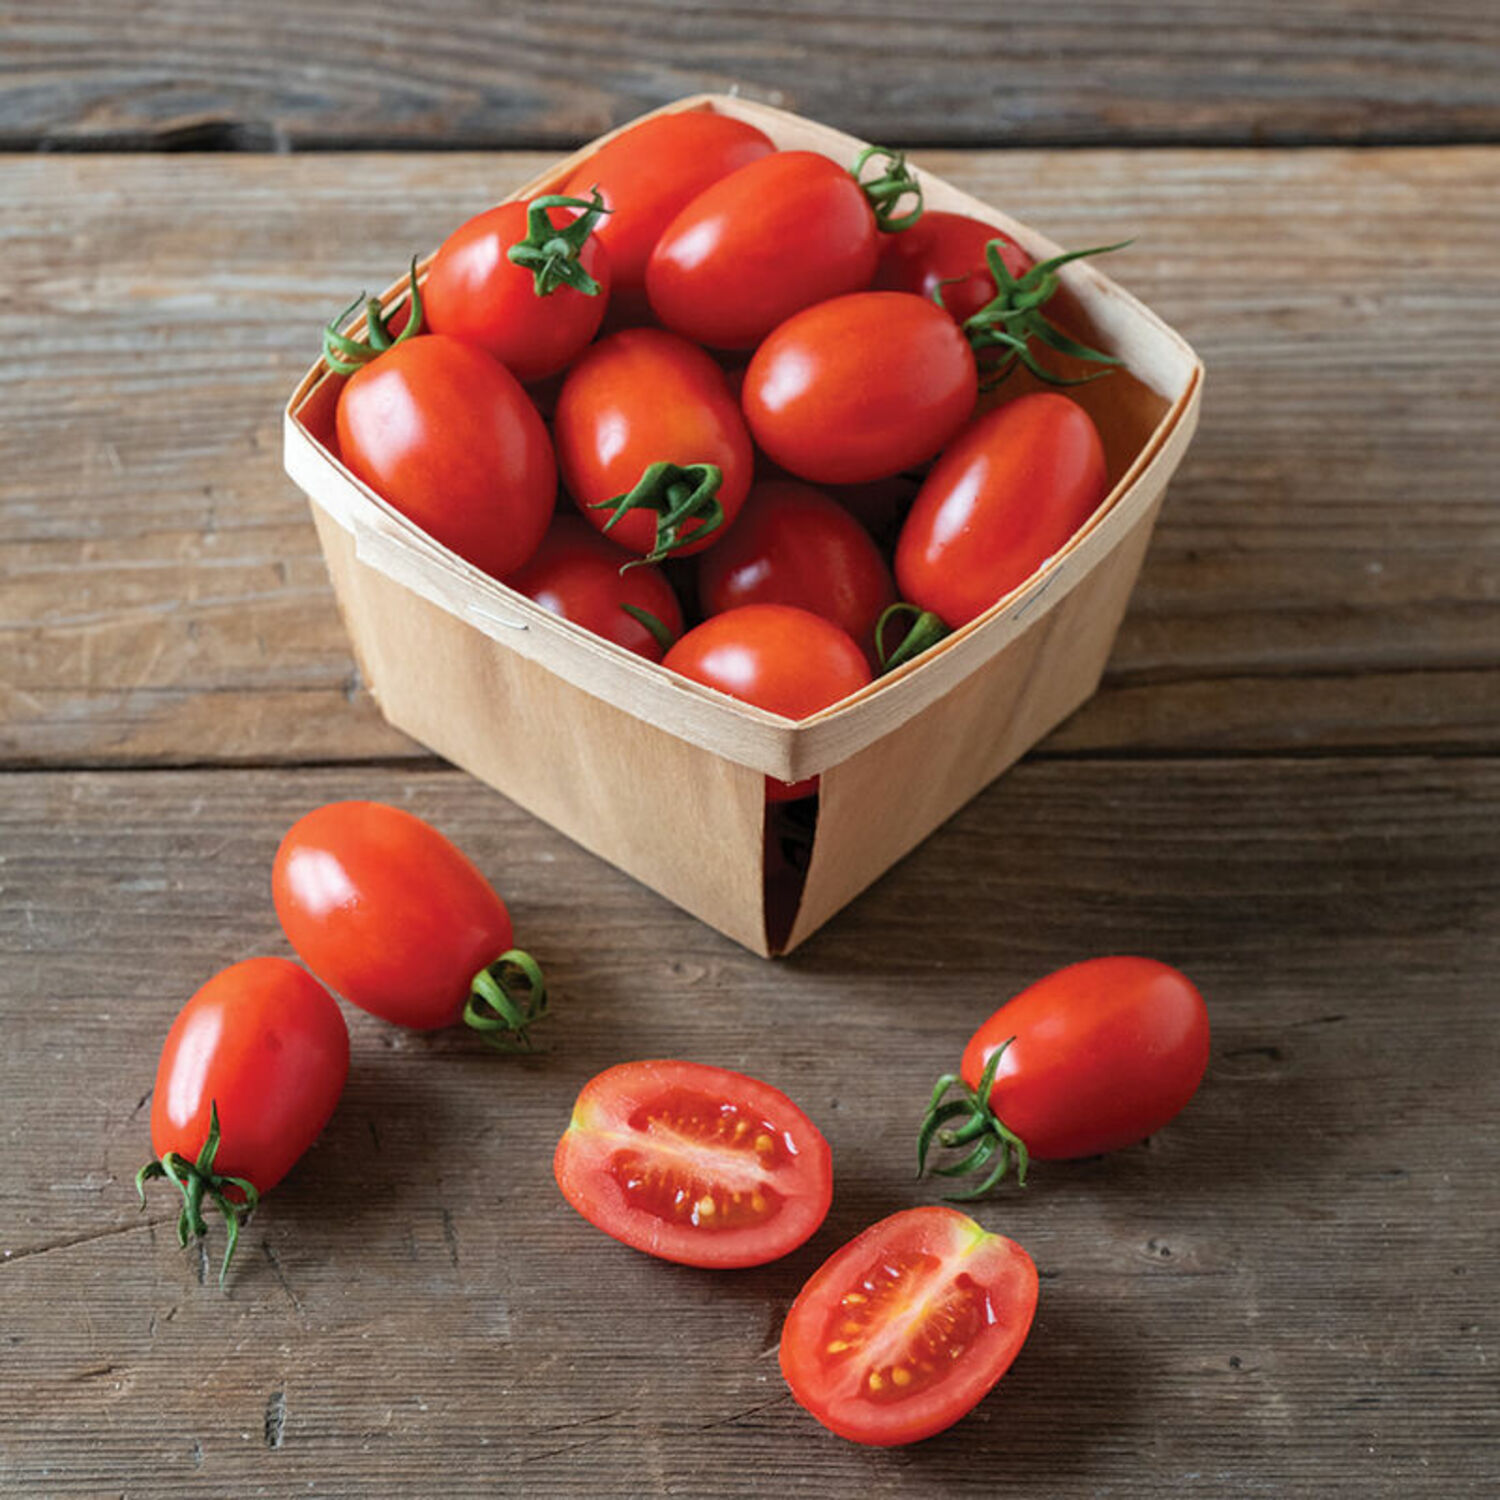 Candy Bell is a new grape type tomato from Johnny’s that is a determinate type rarely found in grape tomatoes. The downside against the indeterminate is that this with this variety all the fruits may ripen at the same time.